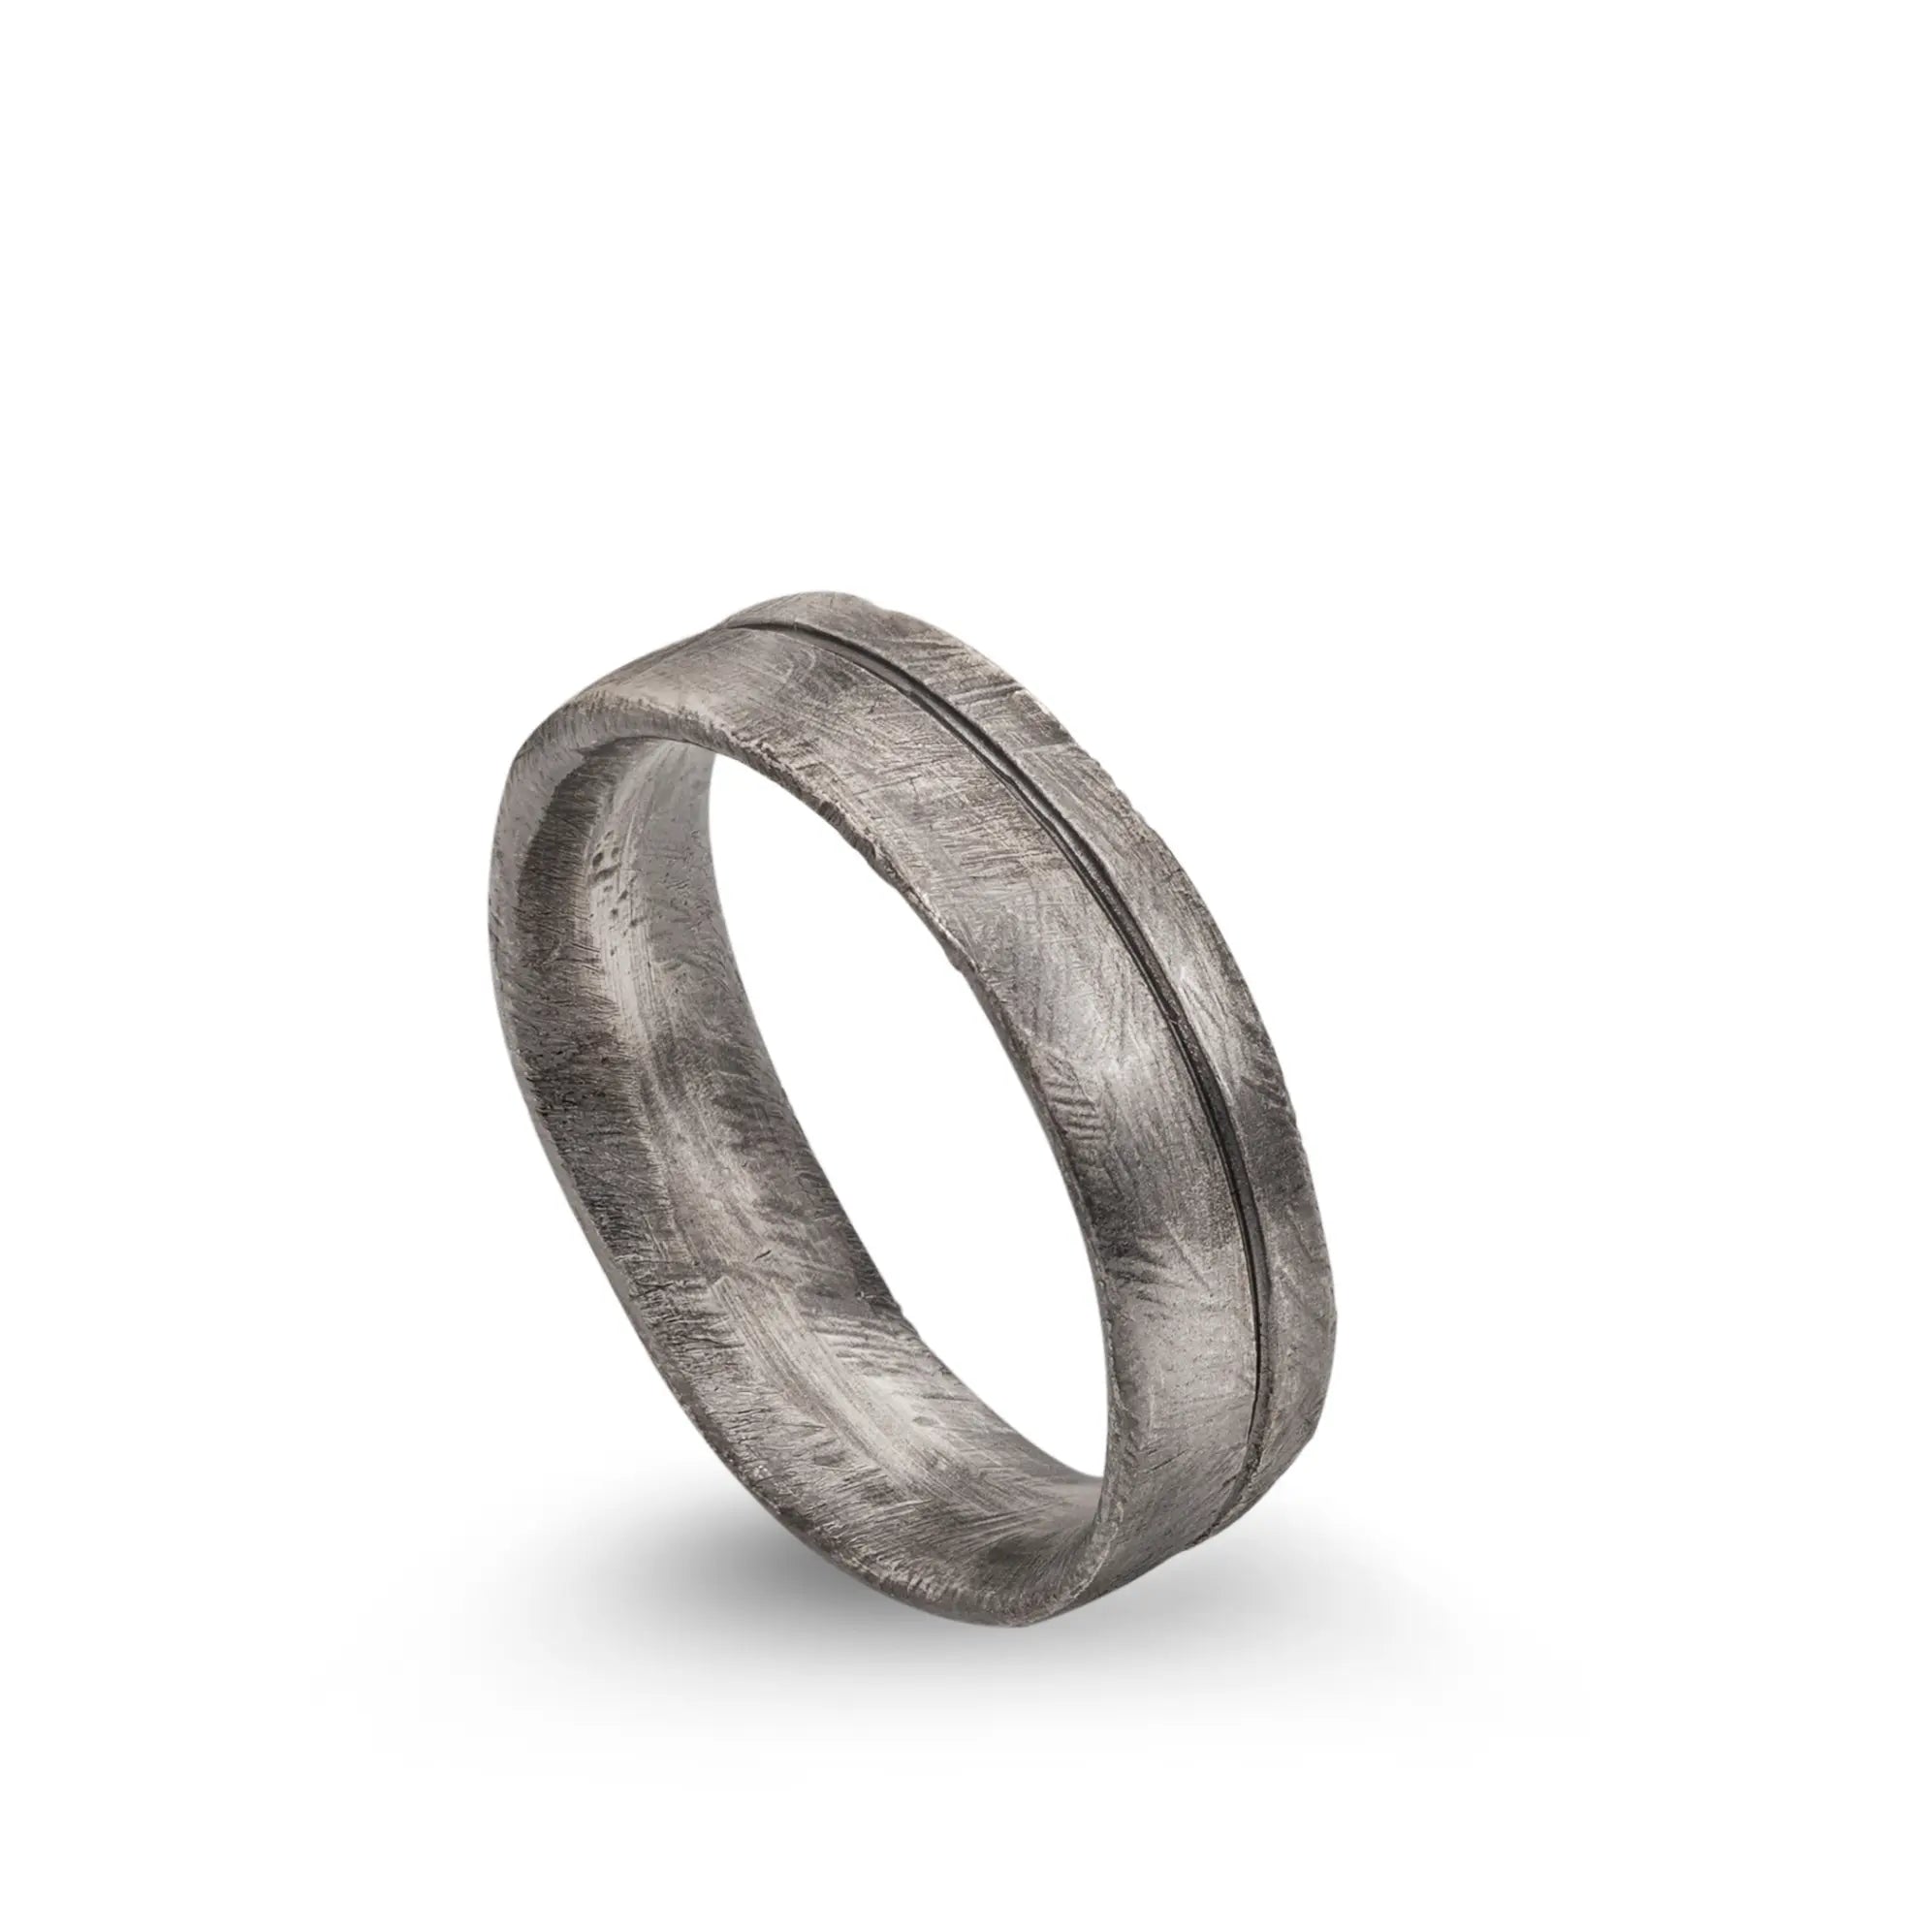 Band Ring Oxidized Silver 925